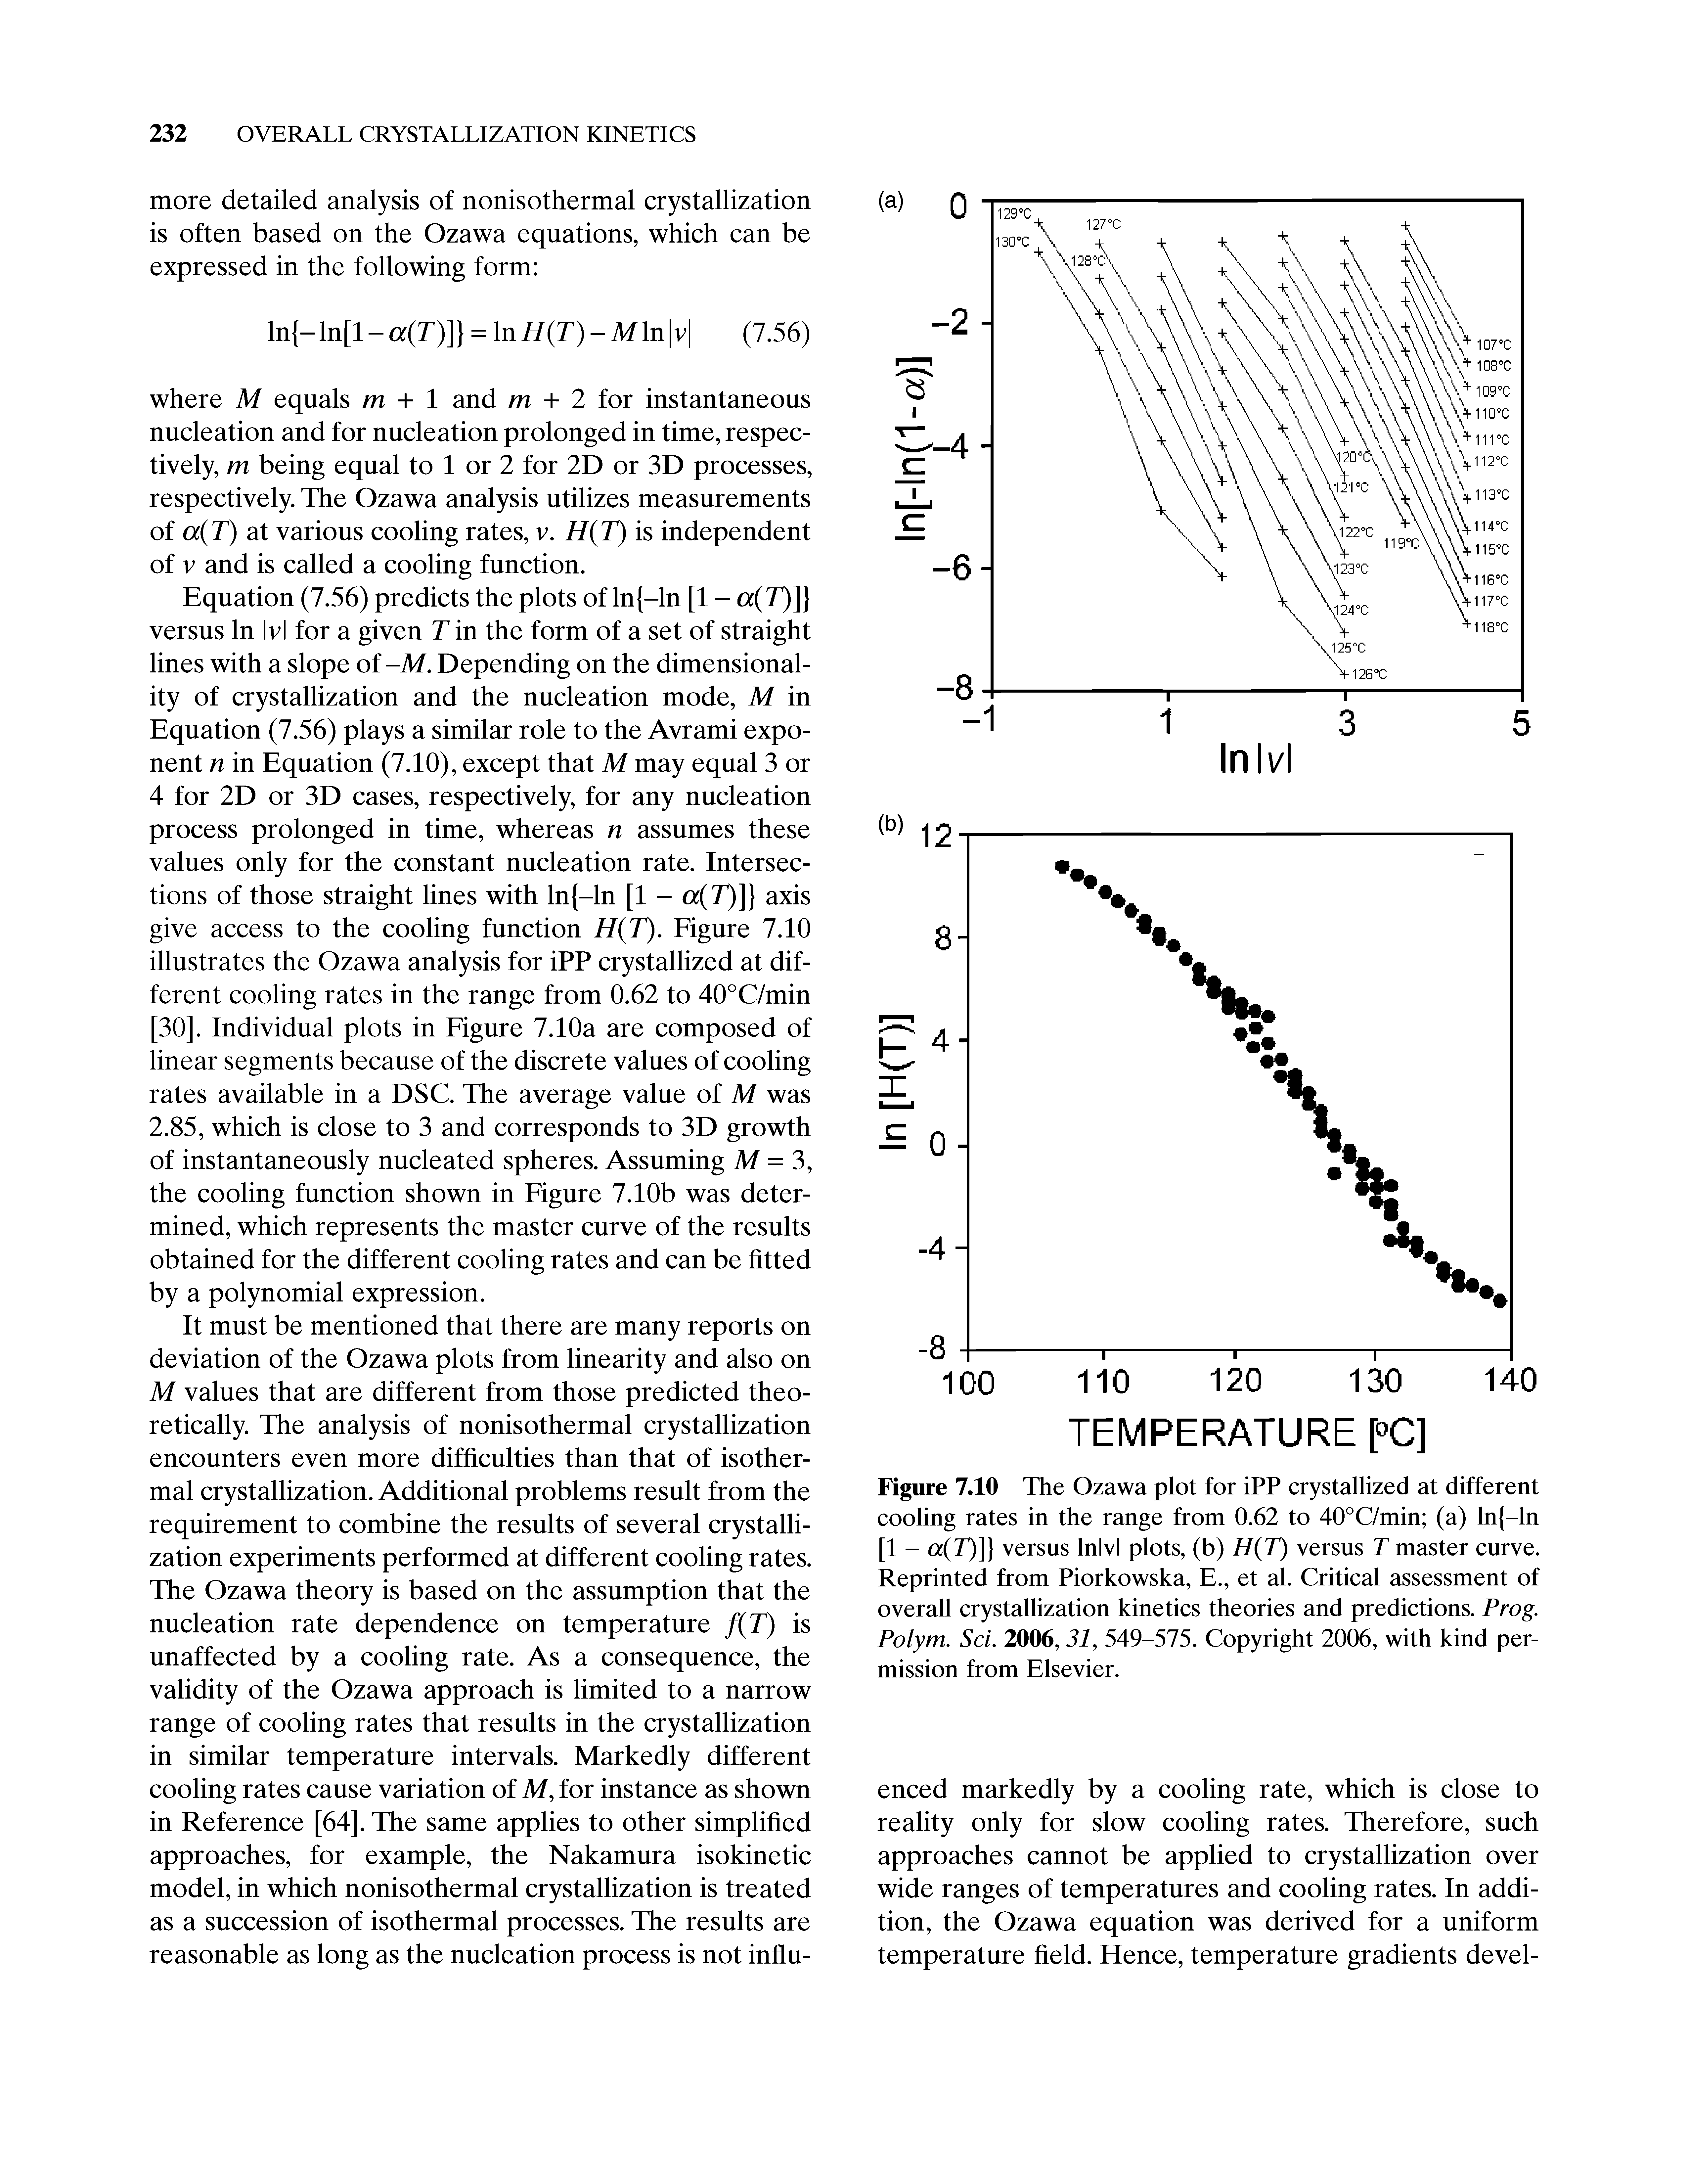 Figure 7.10 The Ozawa plot for iPP crystallized at different cooling rates in the range from 0.62 to 40 C/min (a) ln -ln [1 - a(T)] versus Inivl plots, (b) H(T) versus T master curve. Reprinted from Piorkowska, E., et al. Critical assessment of overall crystallization kinetics theories and predictions. Prog. Polym. Sci. 2006,31, 549-575. Copyright 2006, with kind permission from Elsevier.